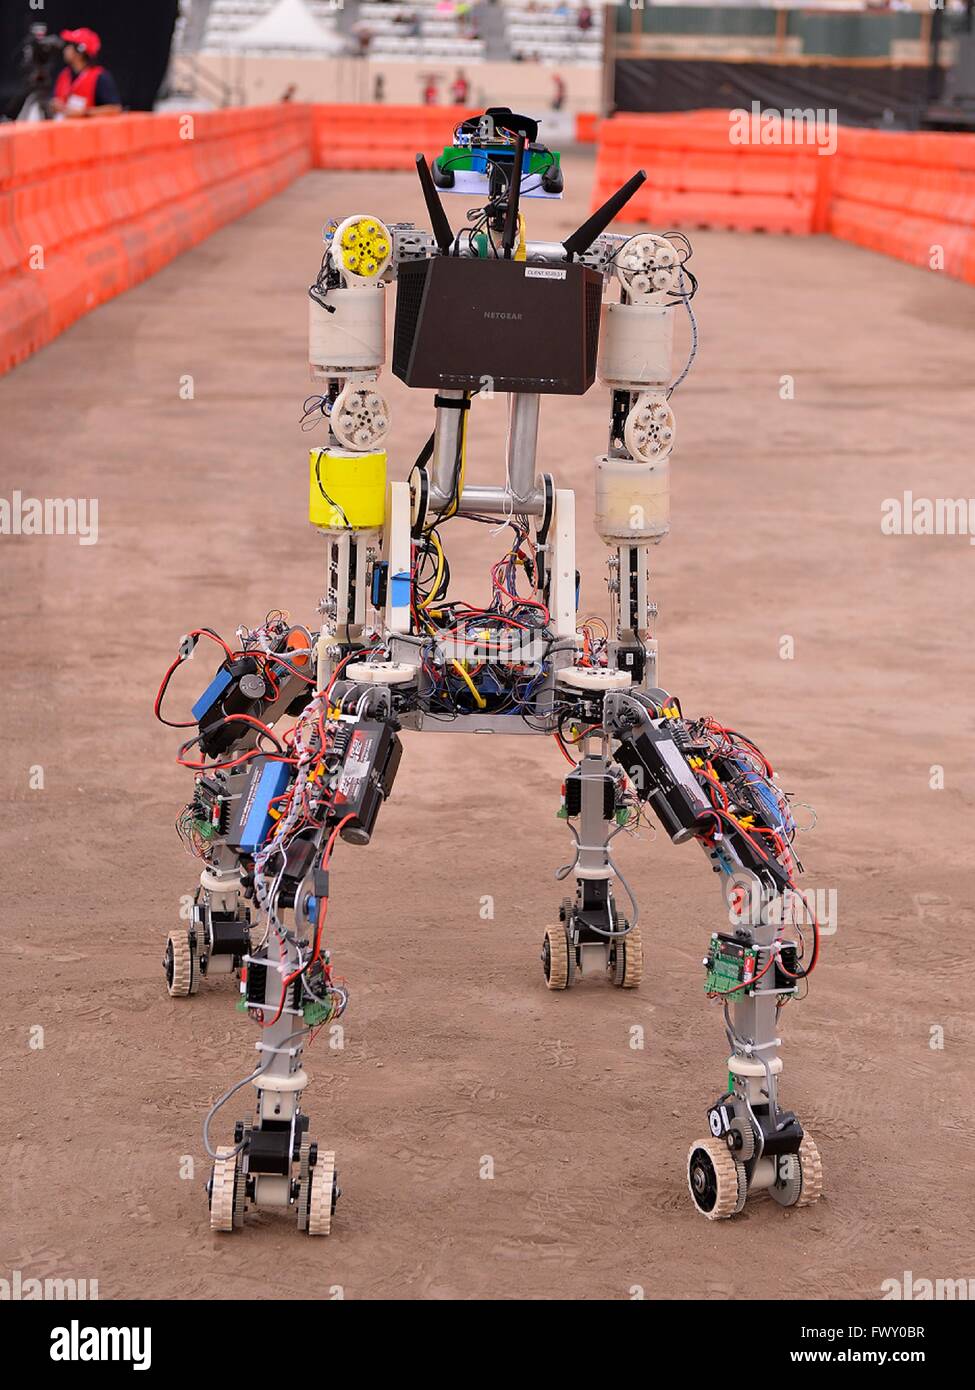 Team Grit Cog Burn robot during the DARPA Rescue Robot Showdown at  Fairplex Fairground June 5, 2015 in Pomona, California. The DARPA event is to challenge teams to design robots that will conduct humanitarian, disaster relief and related operations. Stock Photo